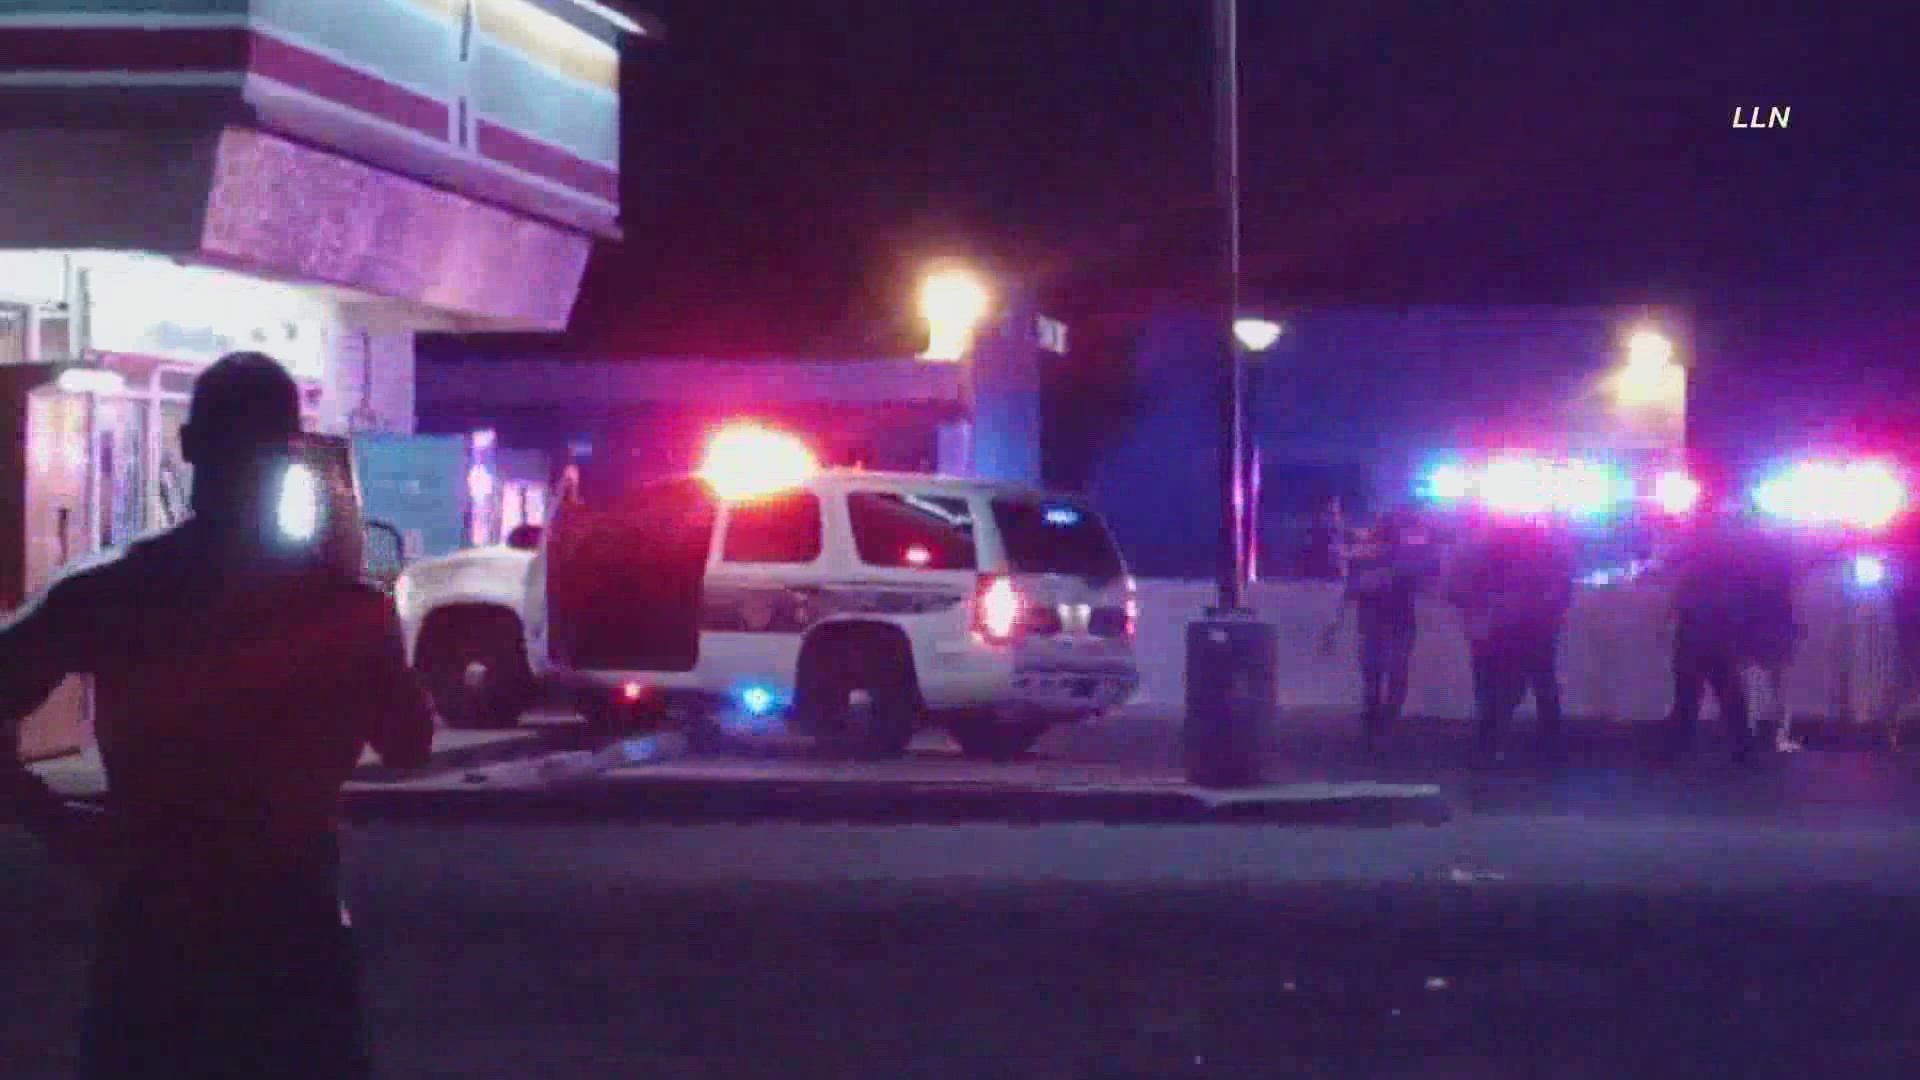 A man with a weapon walked into the convenience store when officers shot at him, the Phoenix Police Department said.